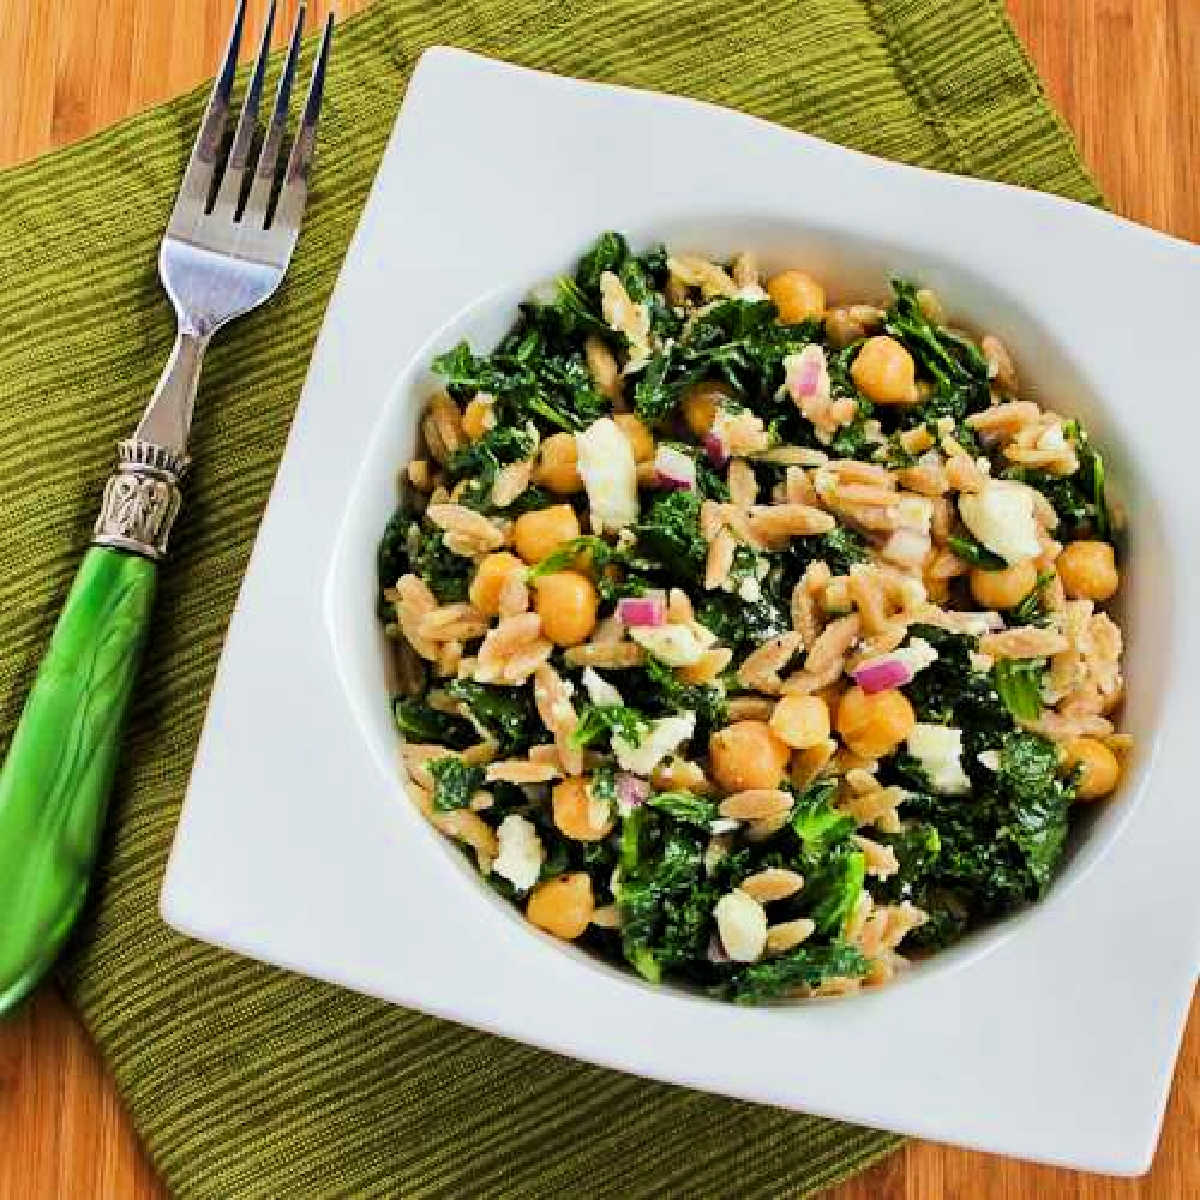 Square image of Orzo Salad with Chickpeas and Kale shown in white serving bowl on green napkin.